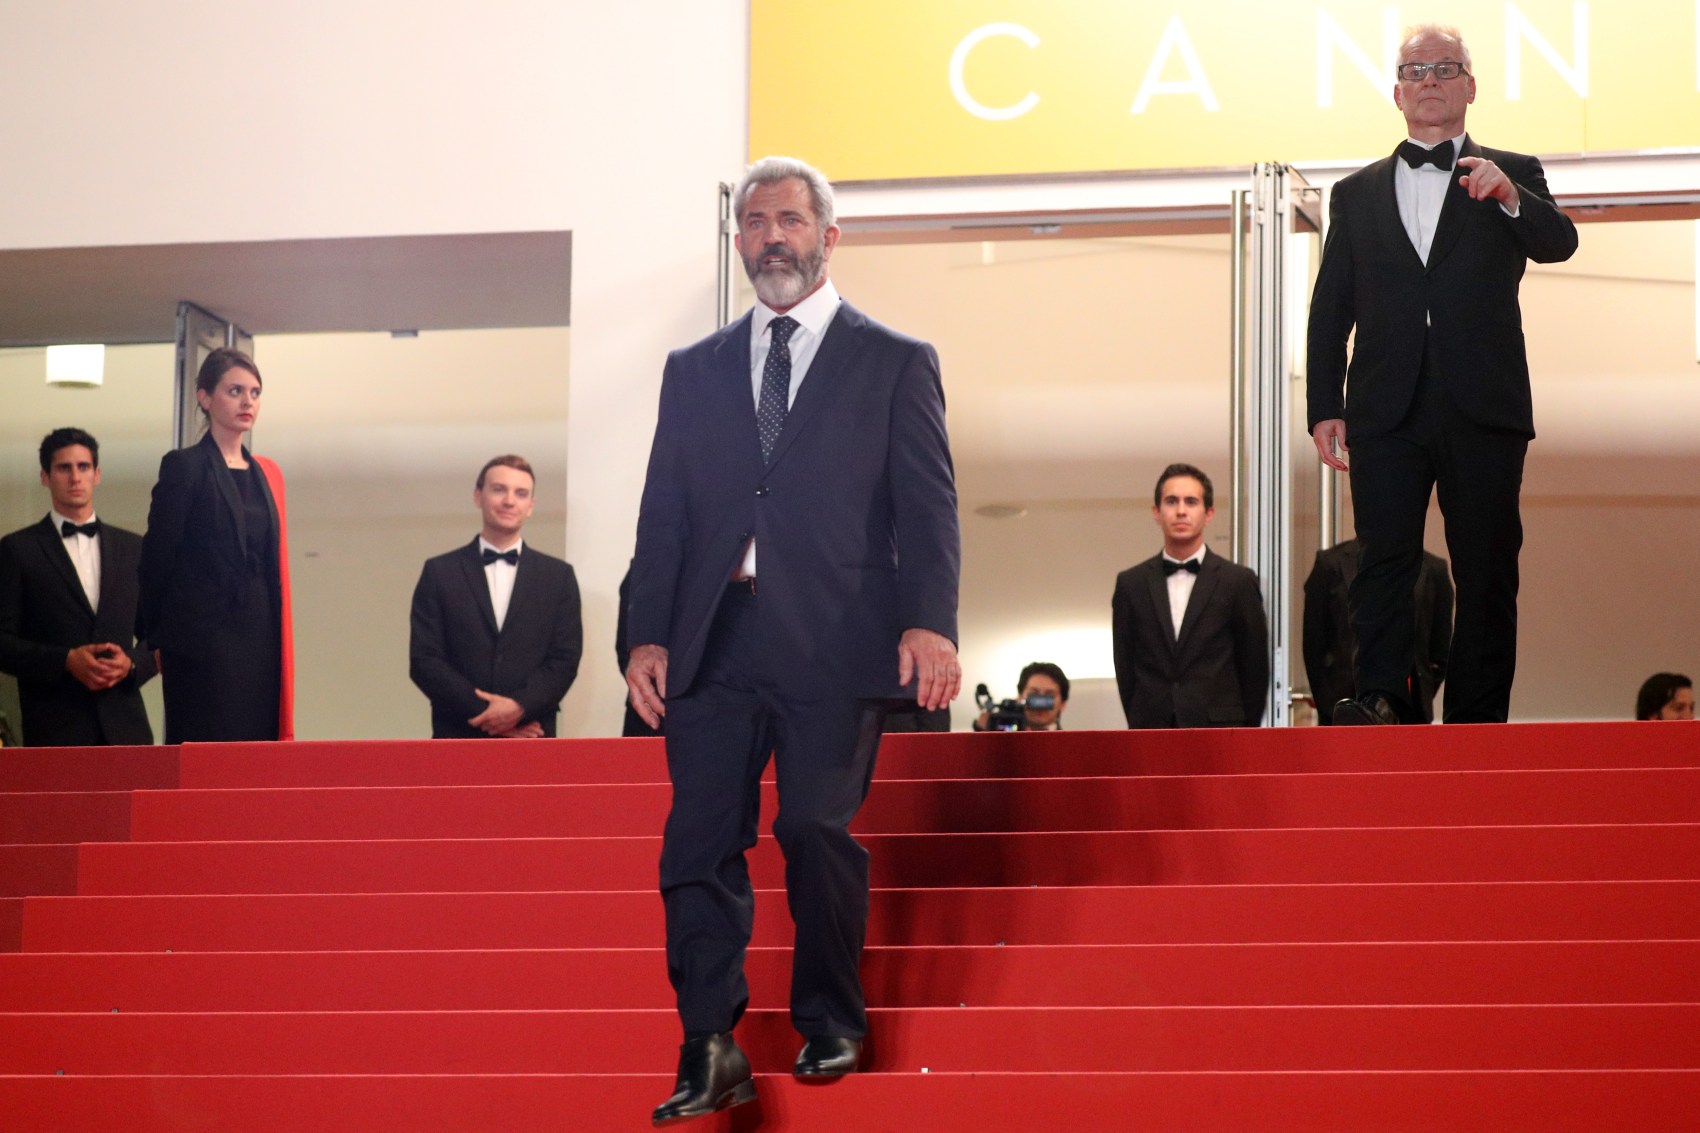 "Blood Father" - Red Carpet Arrivals - The 69th Annual Cannes Film Festival